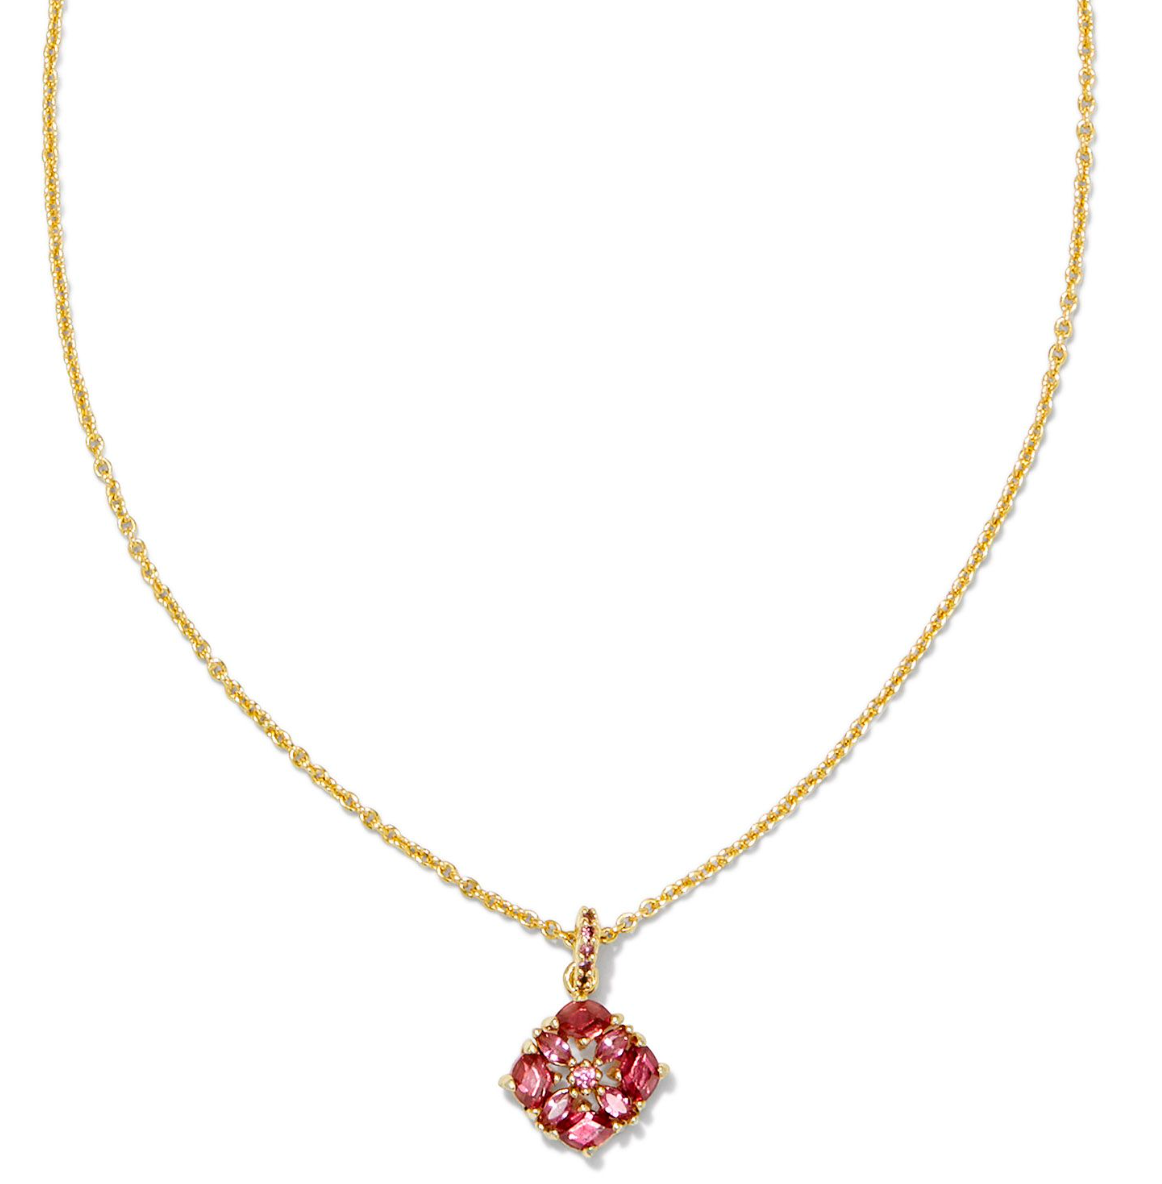 Dira Gold Crystal Short Pendant Necklace in Pink Mix | Kendra Scott - The Street Boutique 